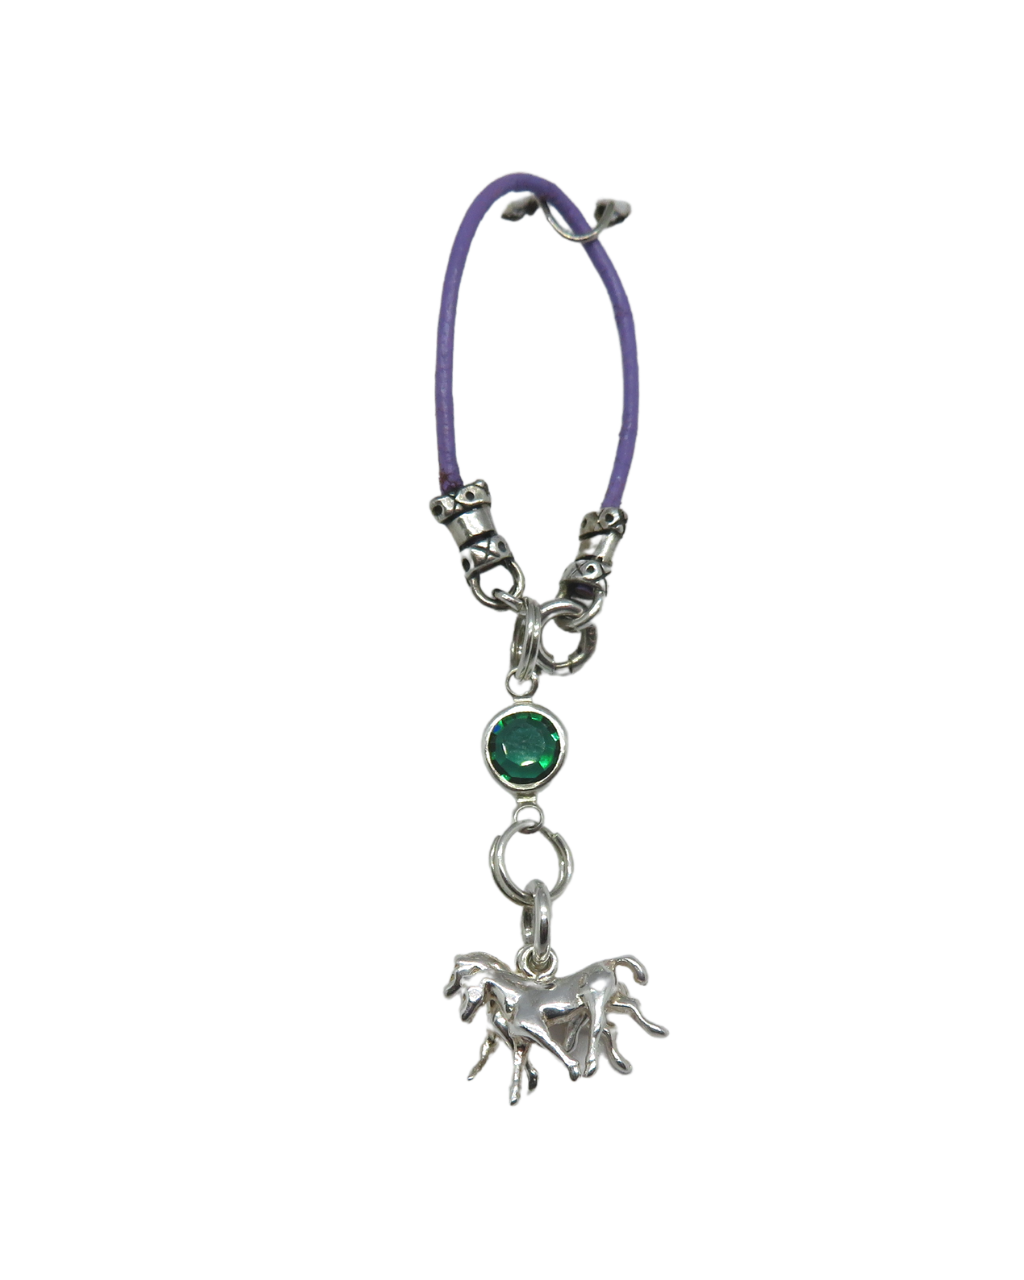 3D Race Horses Neck n' Neck Removable Sterling Charm 1 1/8"L X 5/8"W with Swarovski Crystal on Leather KooLoop